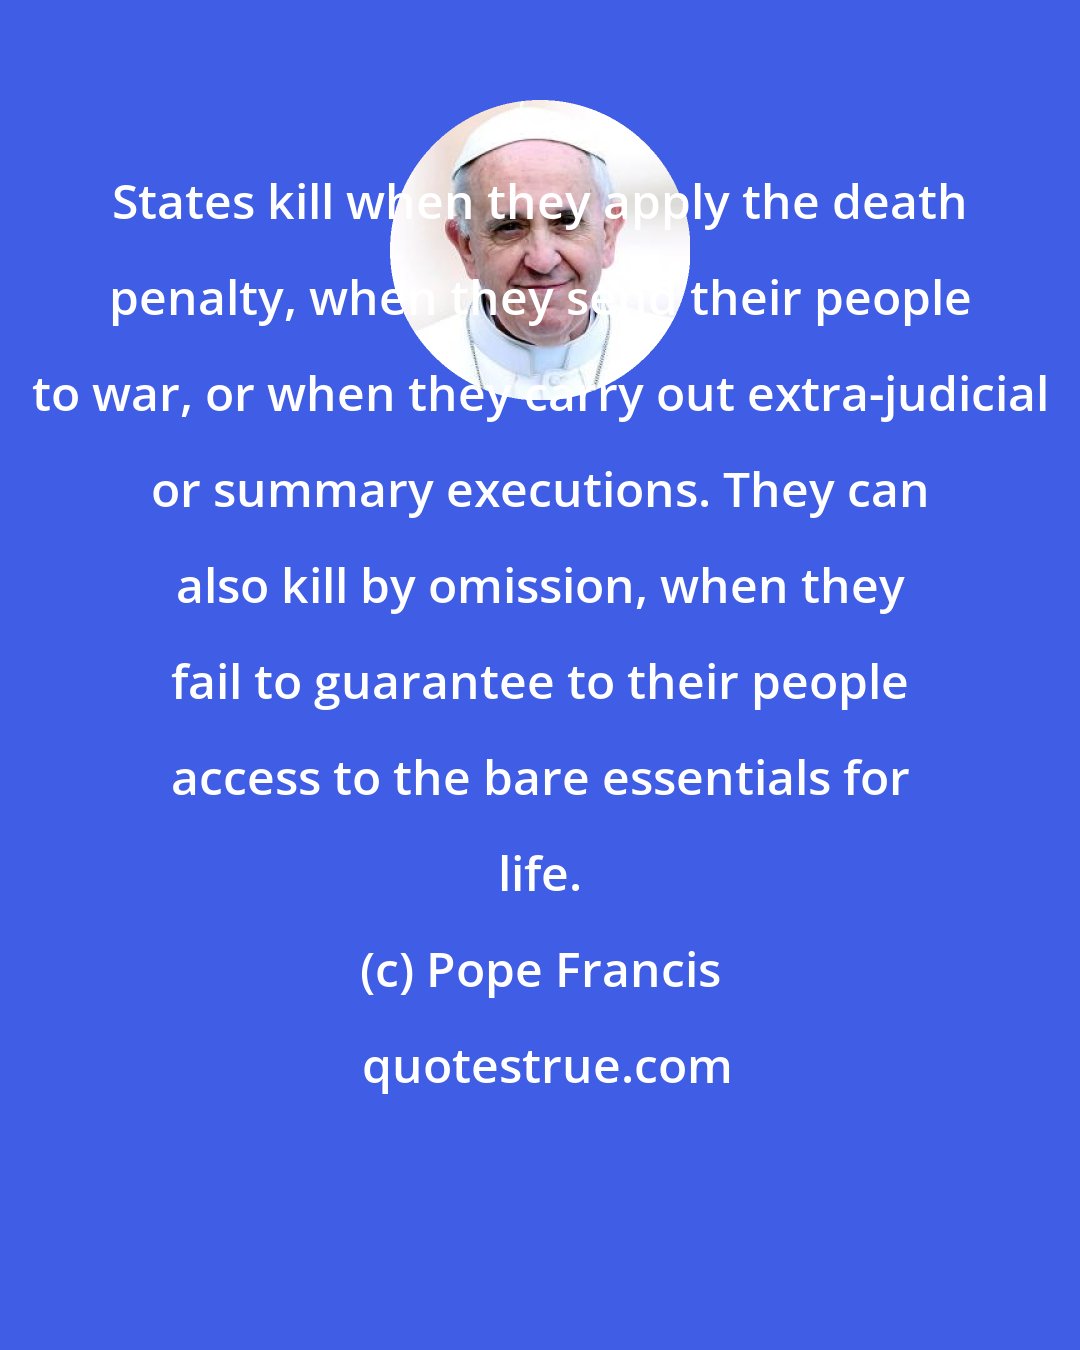 Pope Francis: States kill when they apply the death penalty, when they send their people to war, or when they carry out extra-judicial or summary executions. They can also kill by omission, when they fail to guarantee to their people access to the bare essentials for life.